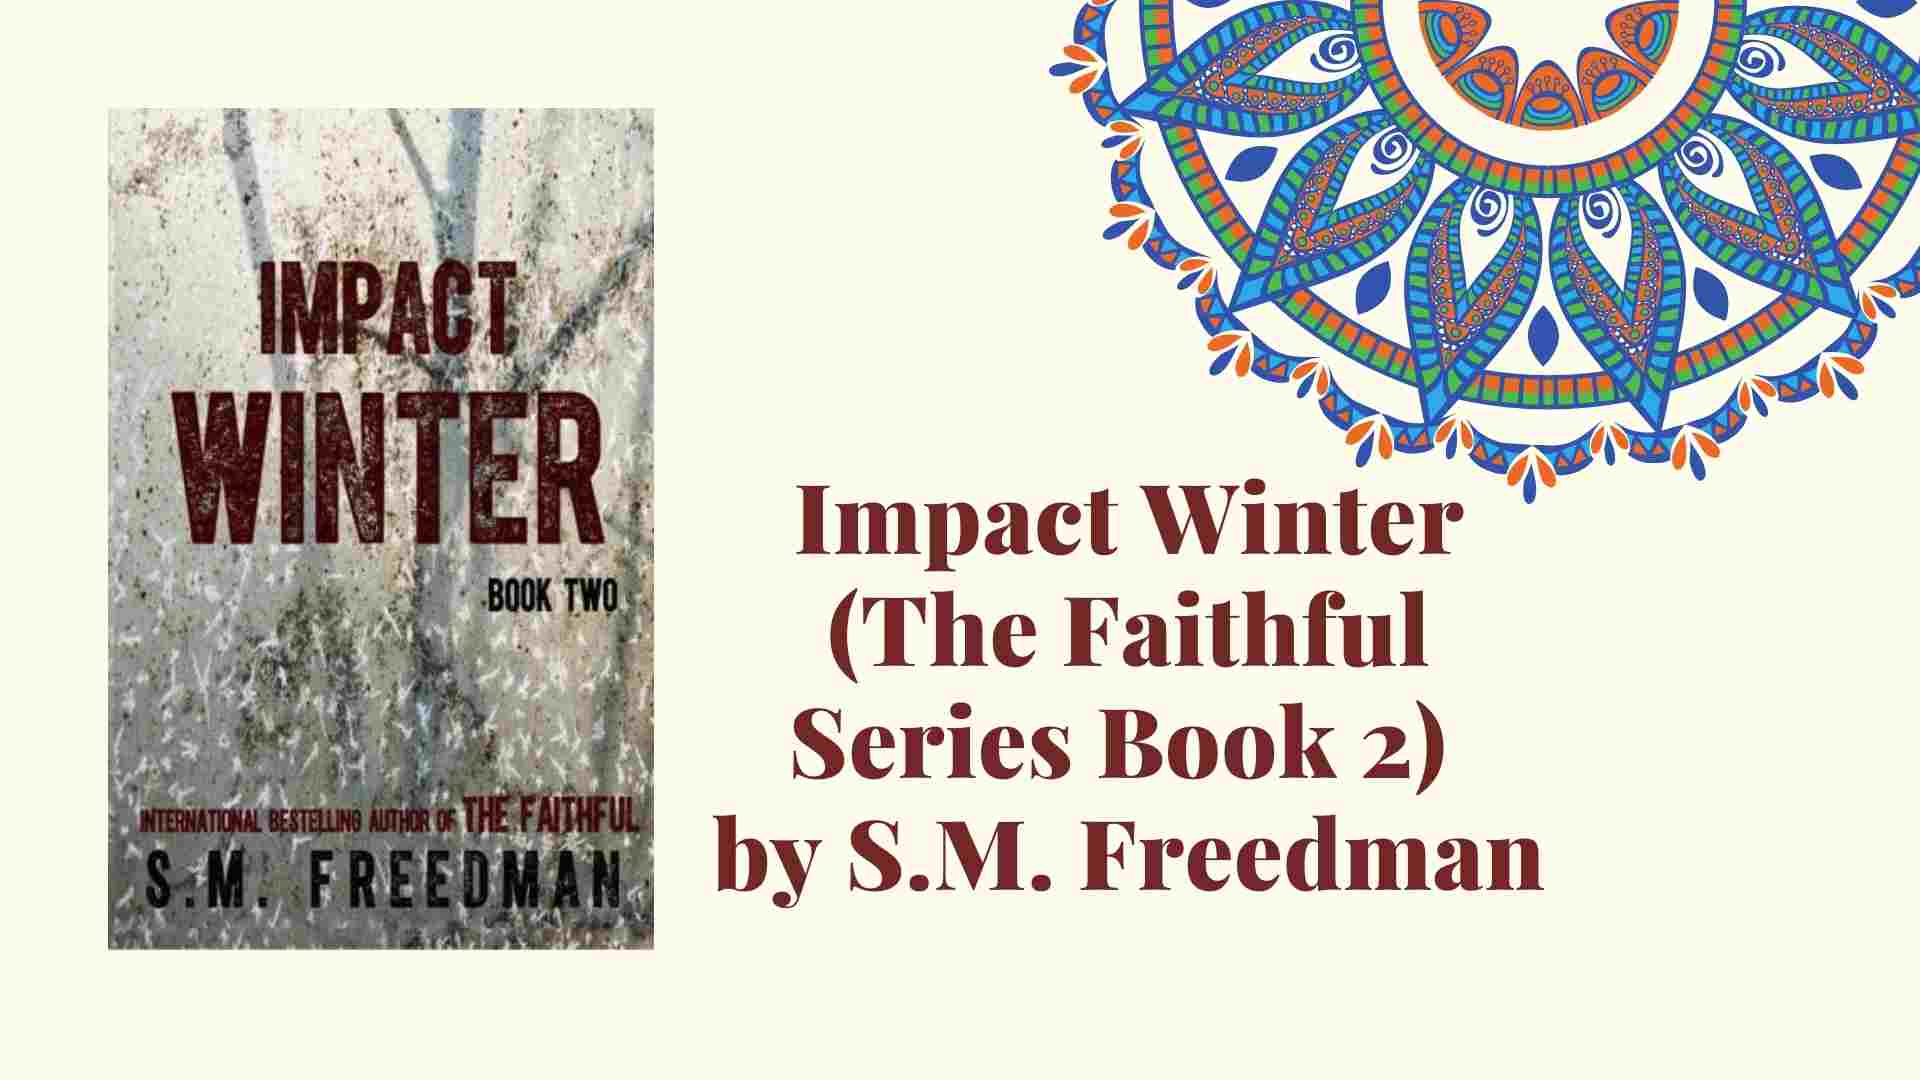 Impact Winter Parents Guide and age rating (The Faithful Book 2)